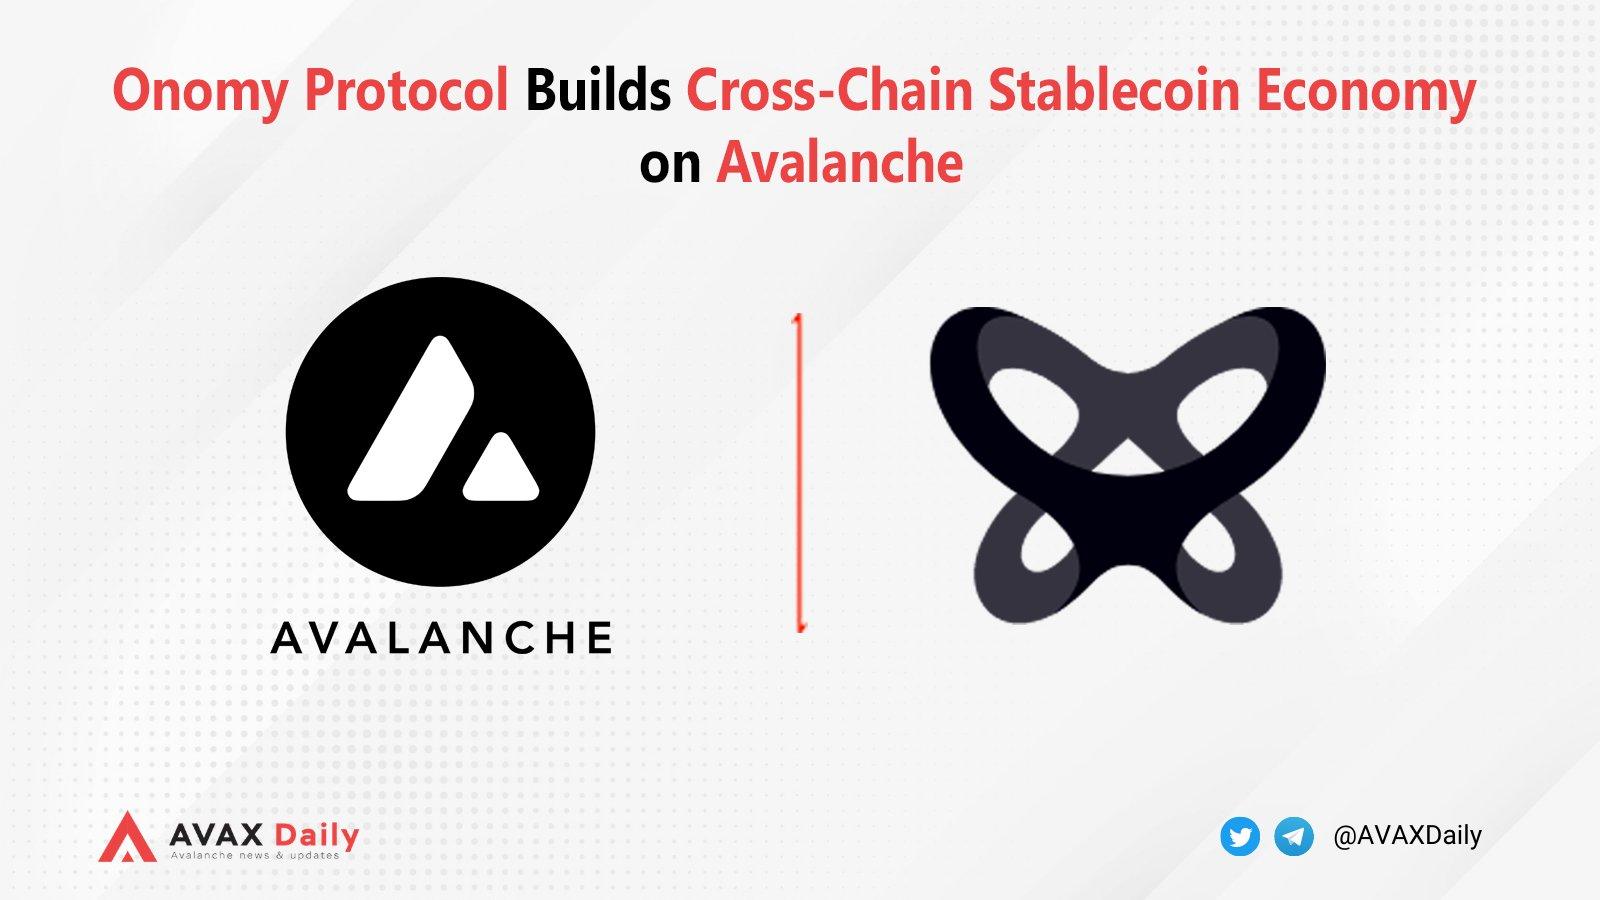 Onomy Protocol Builds Cross-Chain Stablecoin Economy On Avalanche